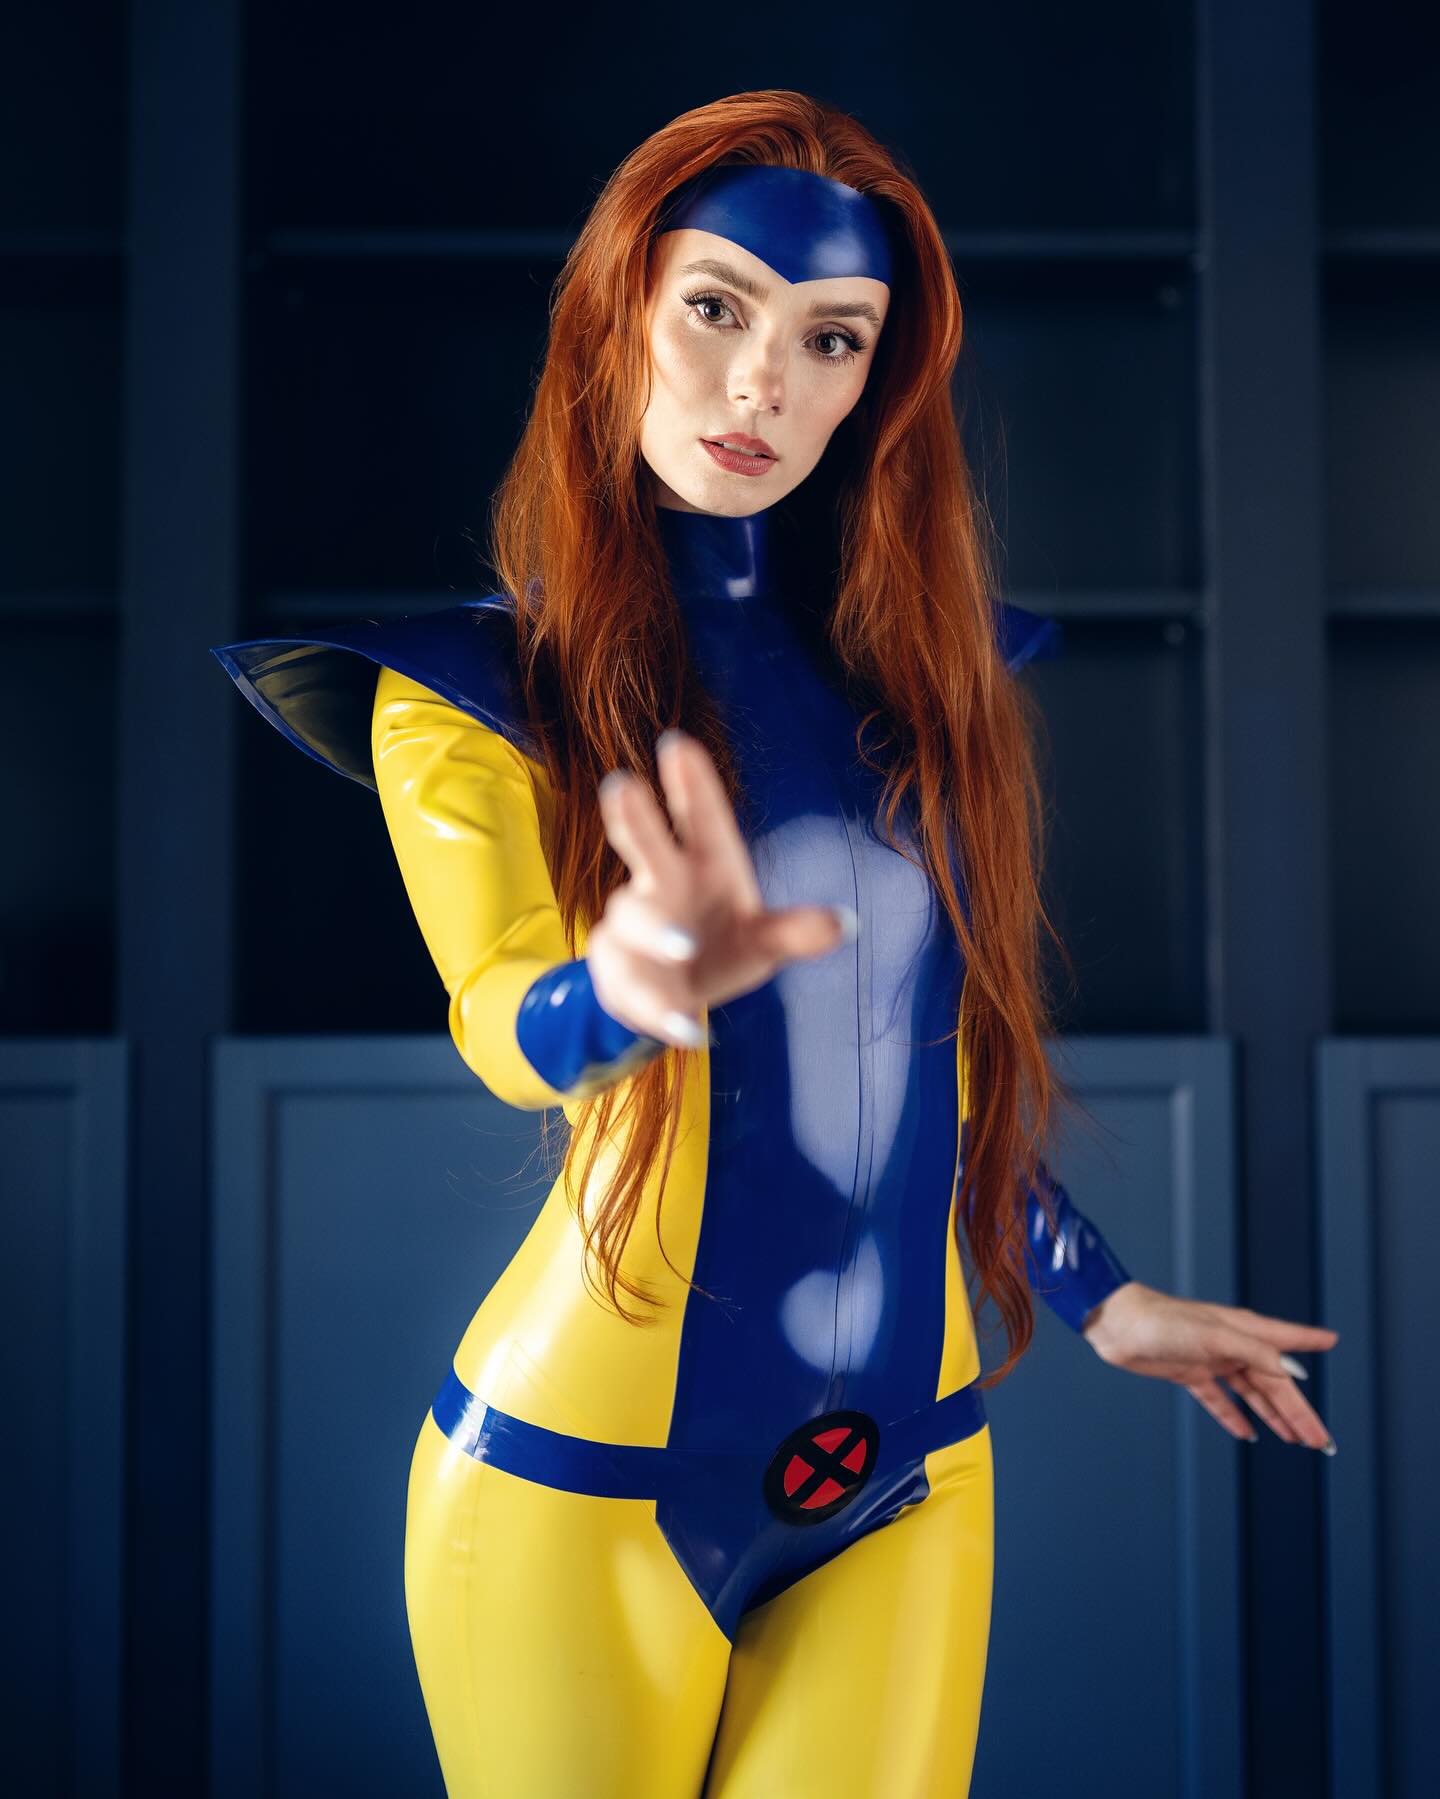 Personally I think Jean Grey is THE Xman, not wolverine....but I'll let it go. Did you see the new Deadpool trailer yet? 👀

Photo shot by @kameraninja 
Outfit from @adalaclothing 

 #cosplayers #cosplayersofinstagram #babesofinstagram #legsfordays #instagirls #xmen #jeangrey #xmen97